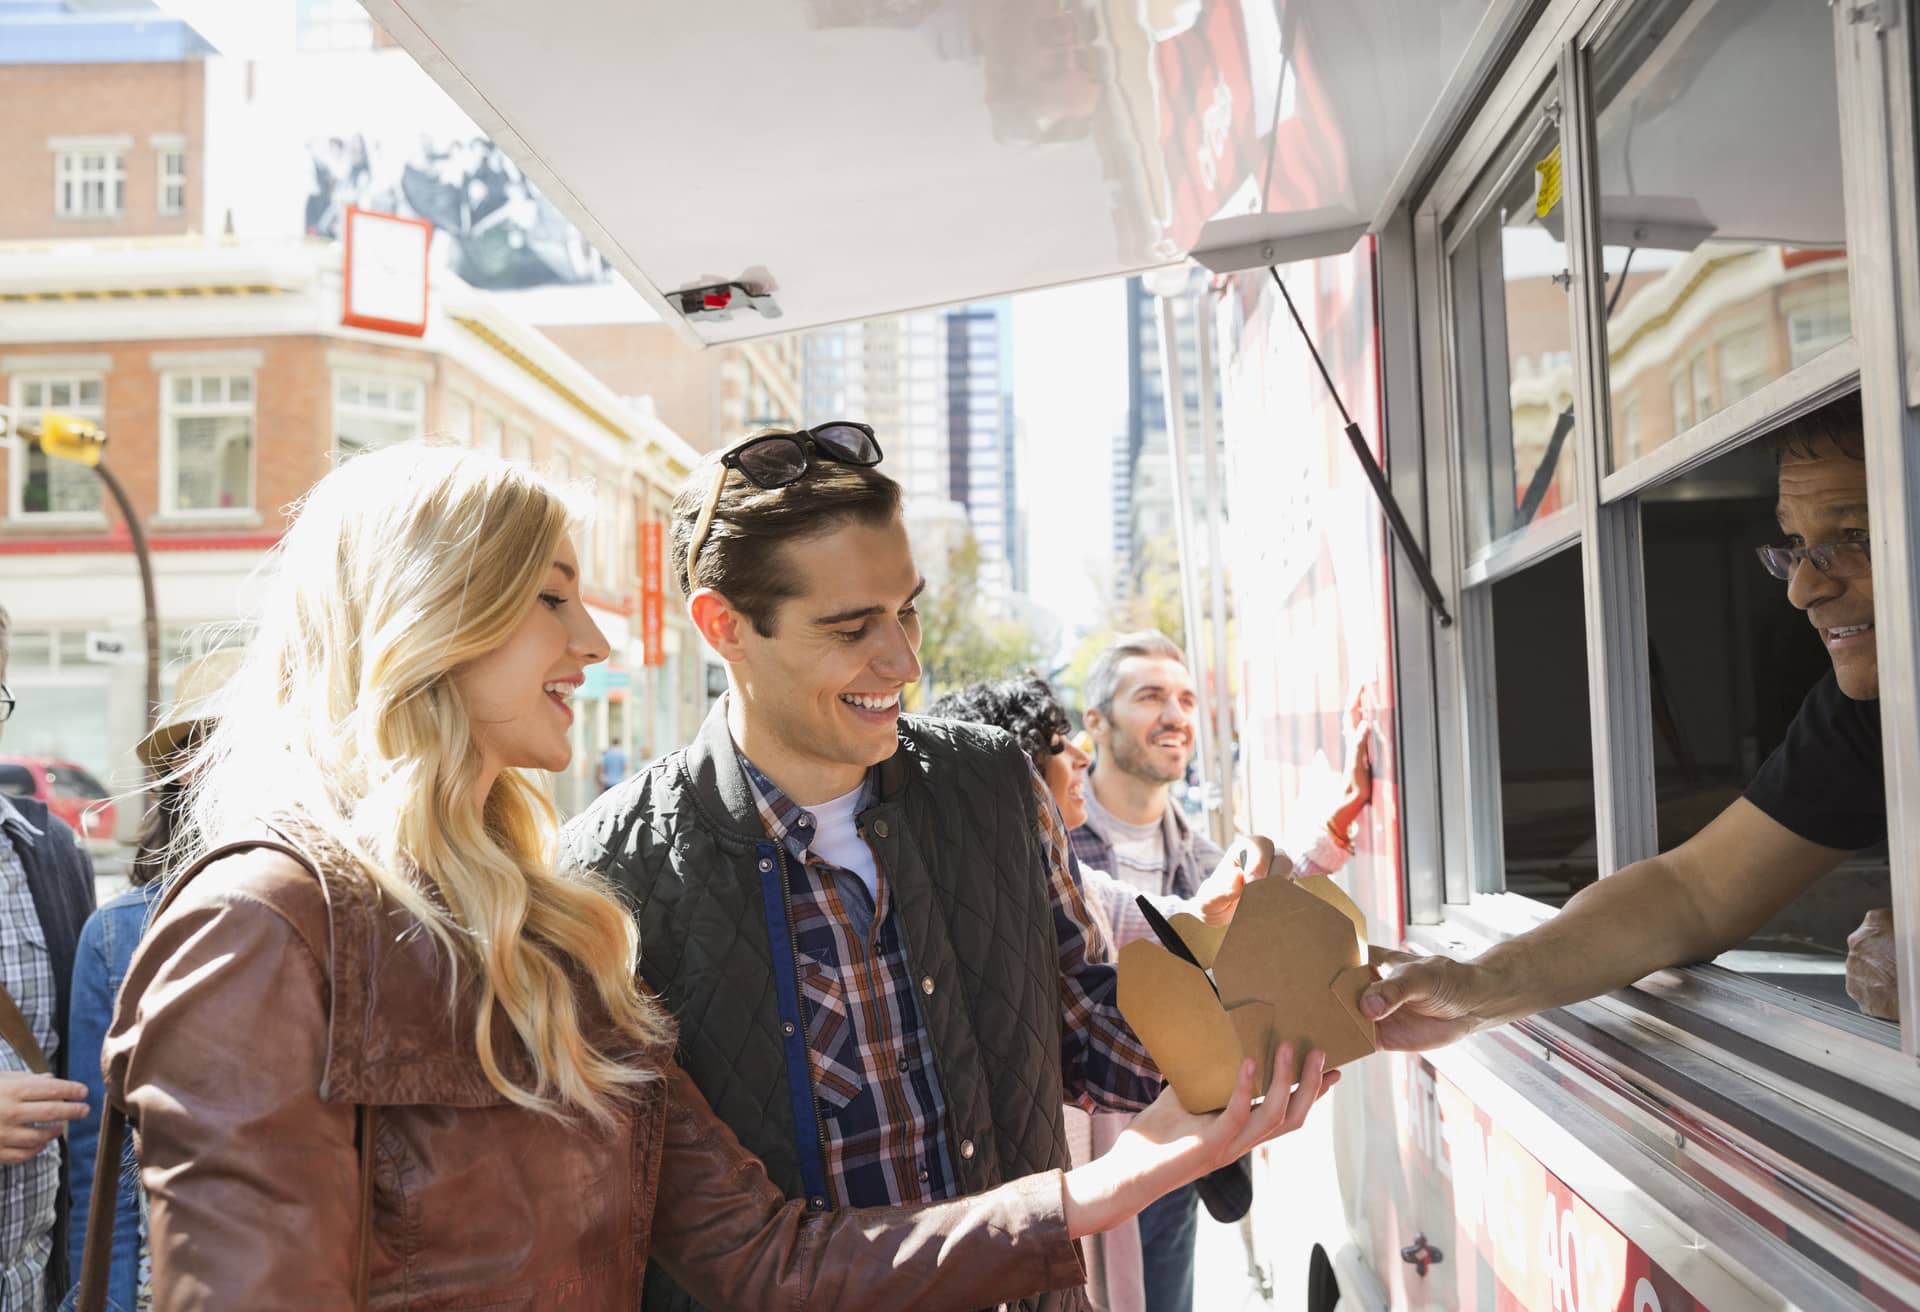 A man and a woman buying food from a food truck